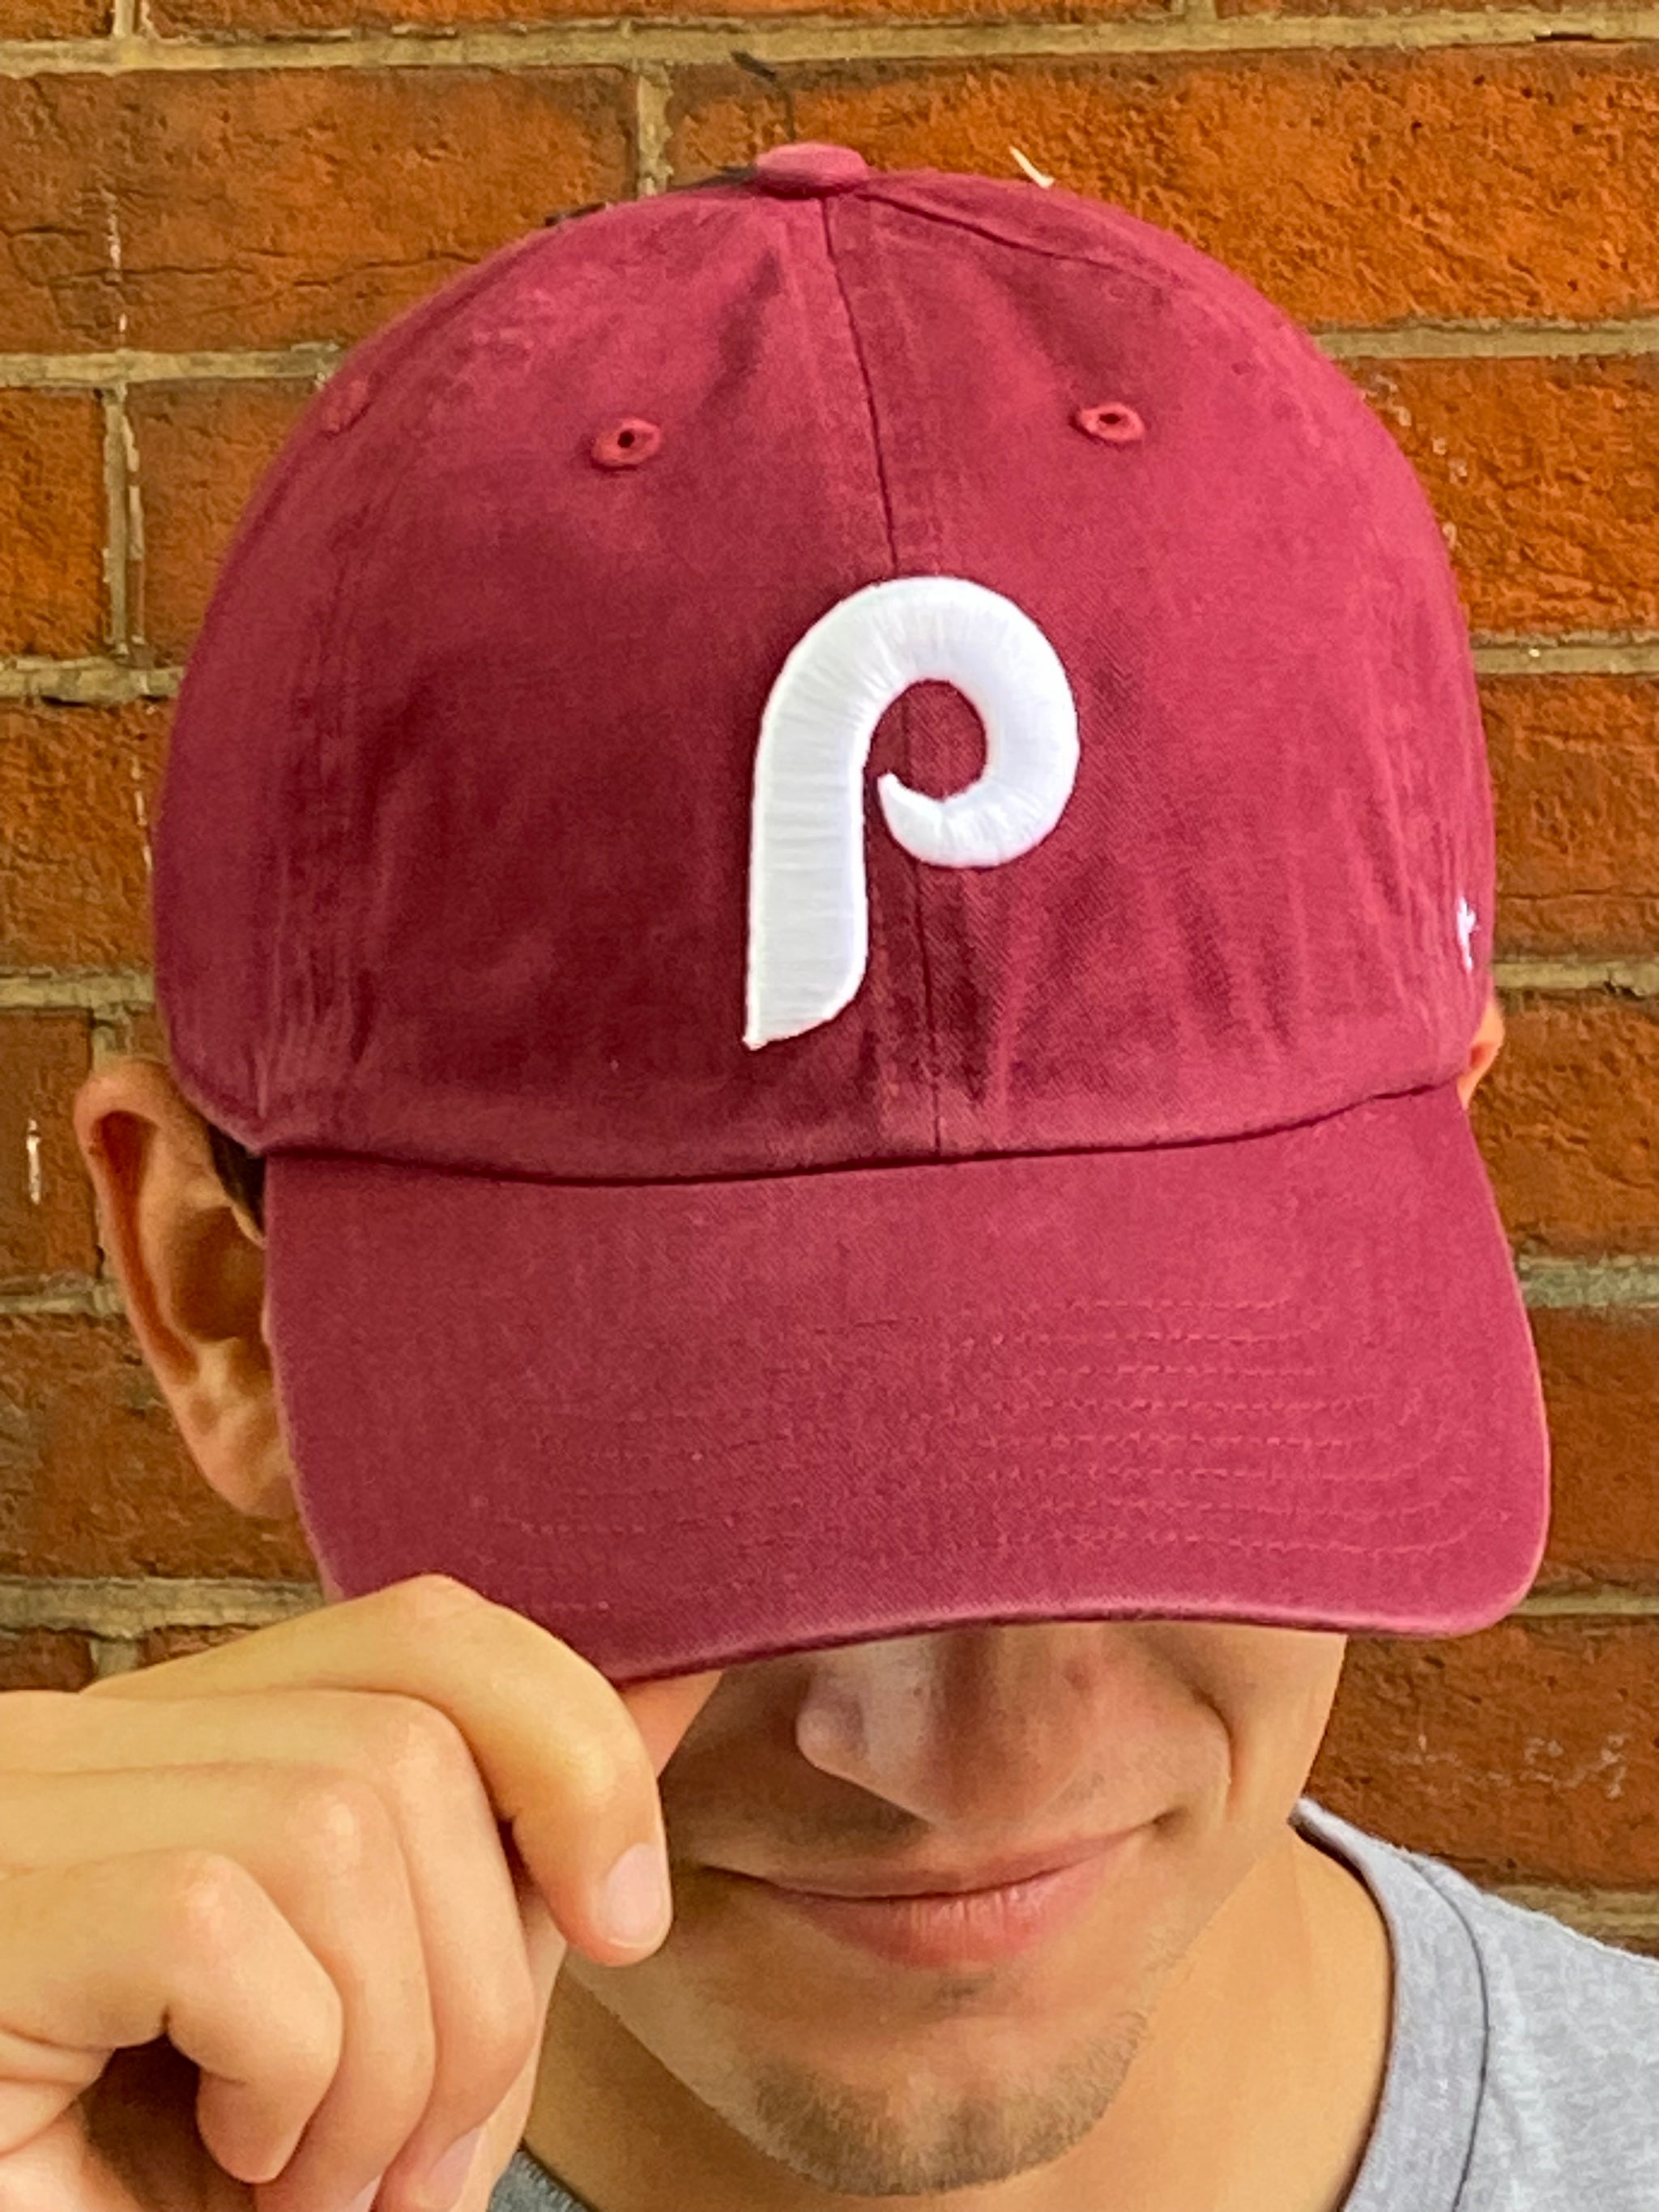 Philadelphia Phillies Signed Hats, Collectible Phillies Hats